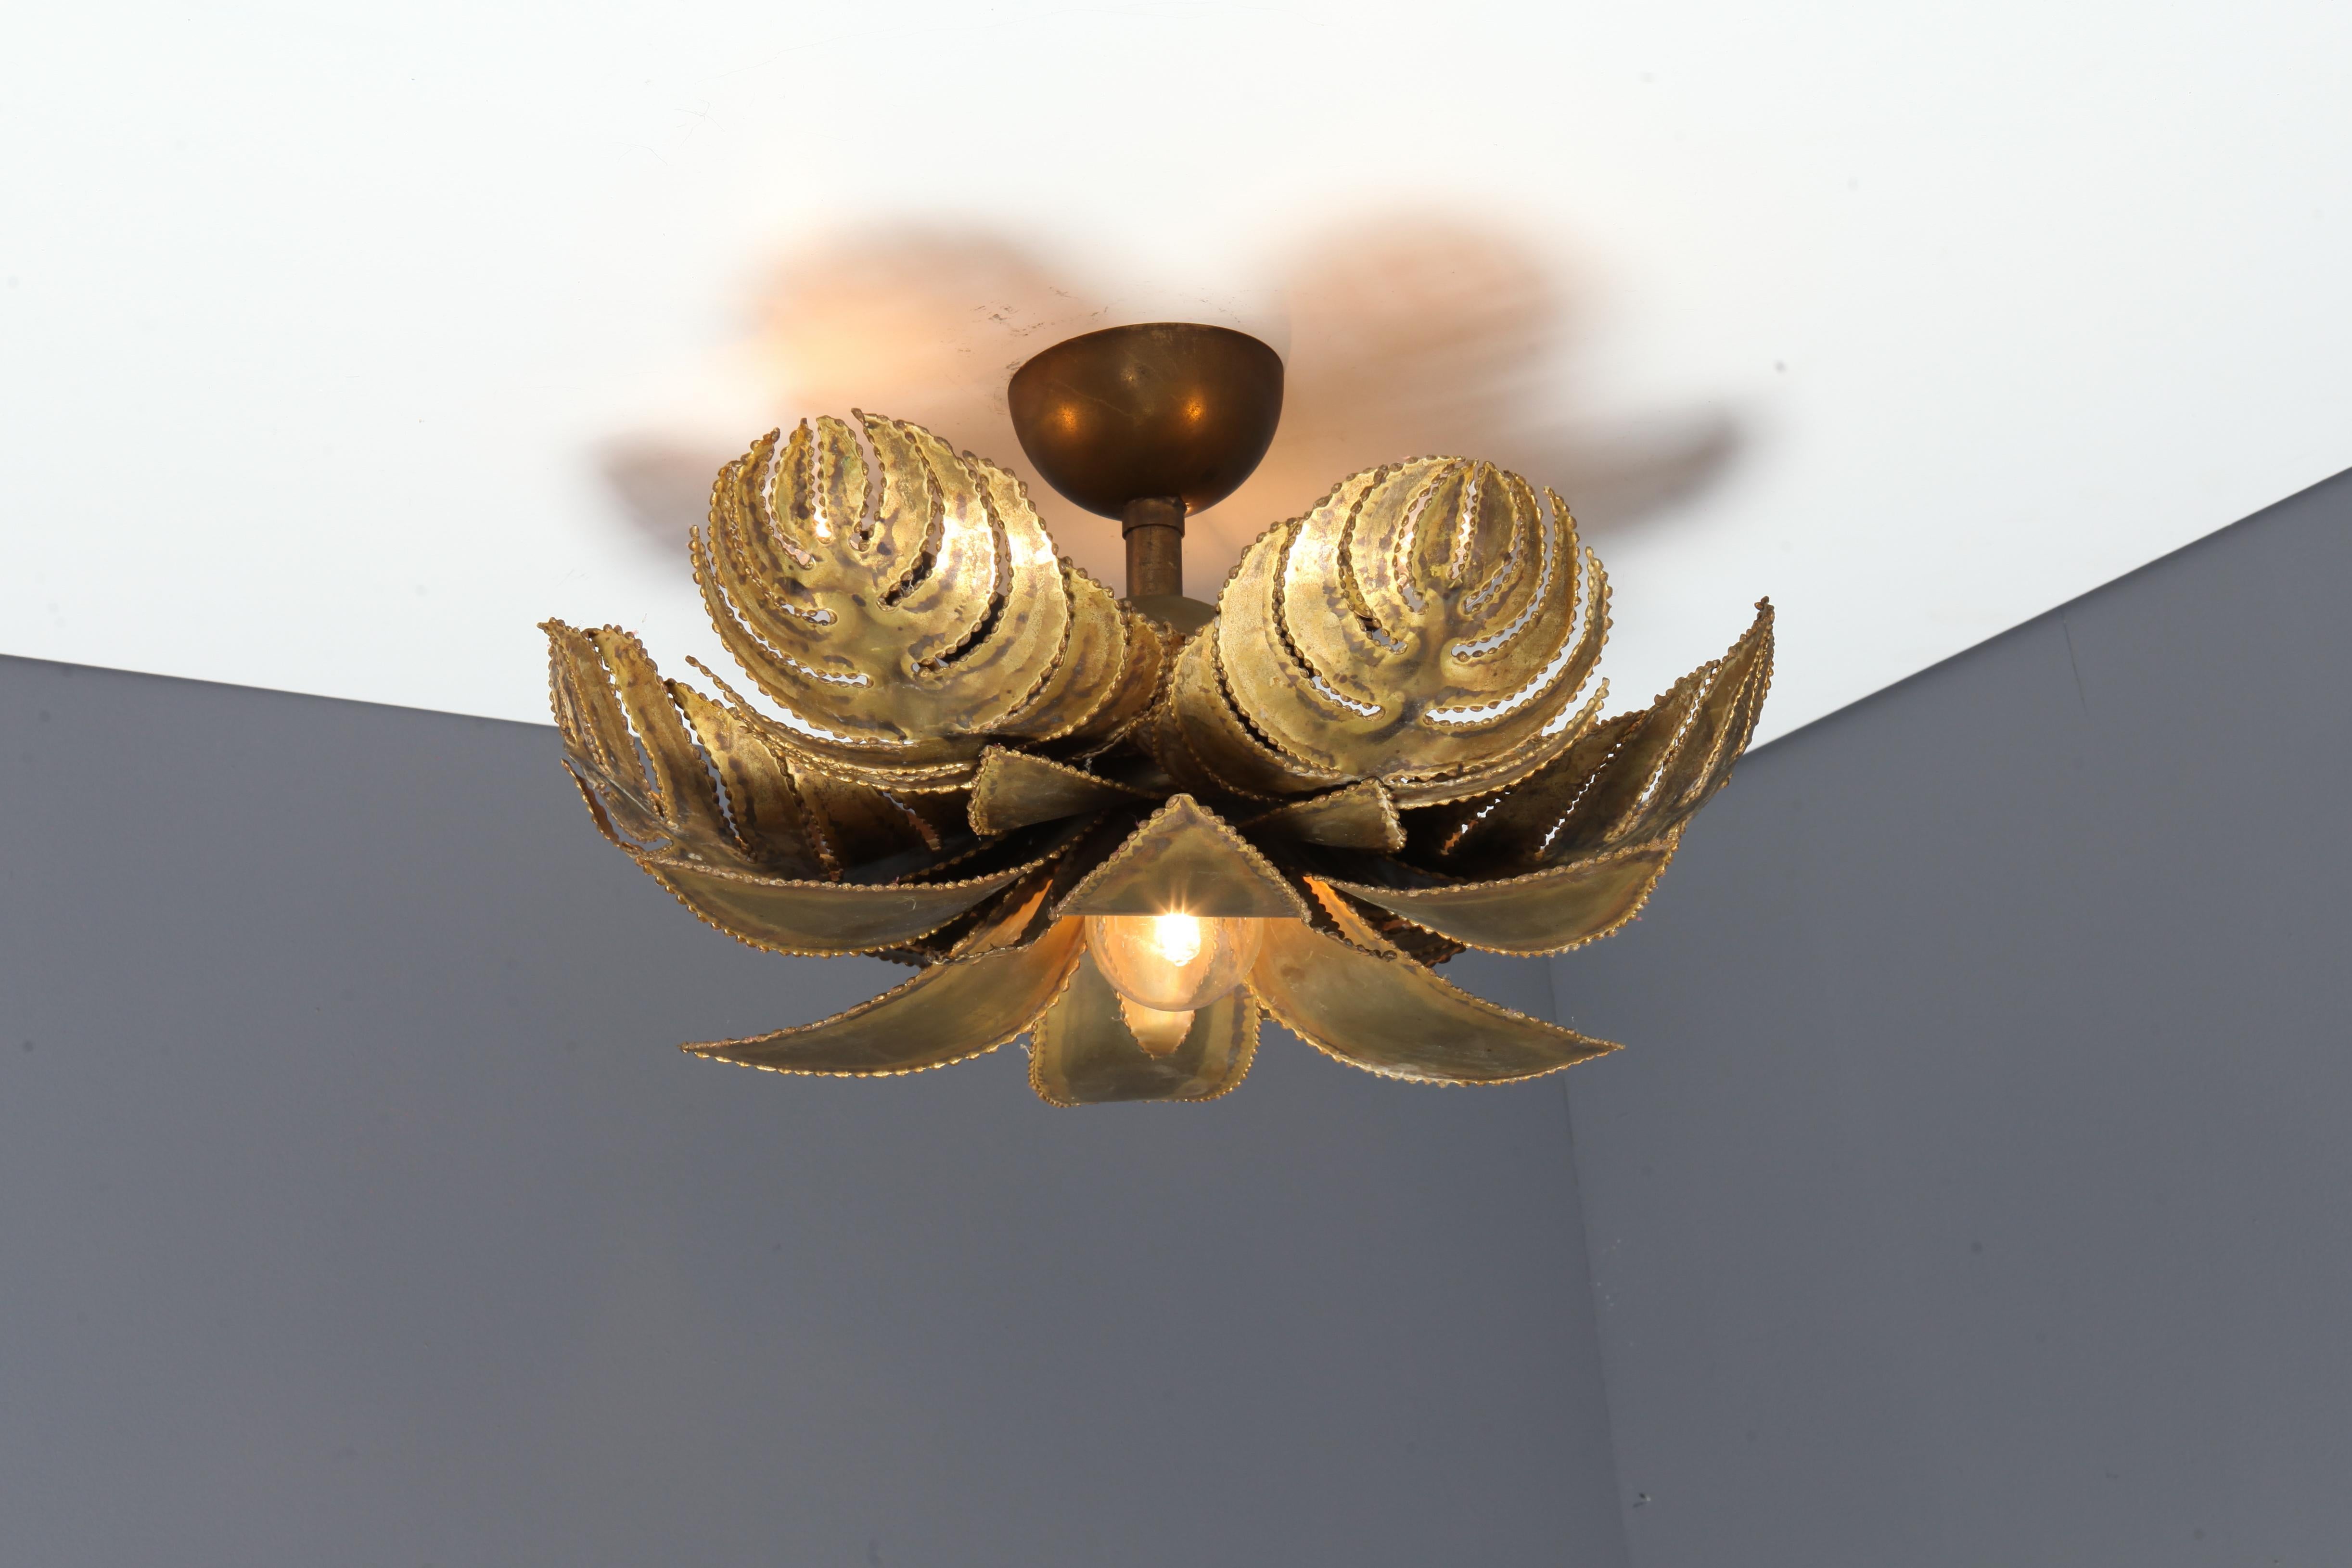 Hollywood Regency brass palm sconce by Maison Jansen, France 1970s
All brass fixtures with true age and patine. Can be used as a ceiling or wall fixture.
France, 1970s. Priced per piece.
  